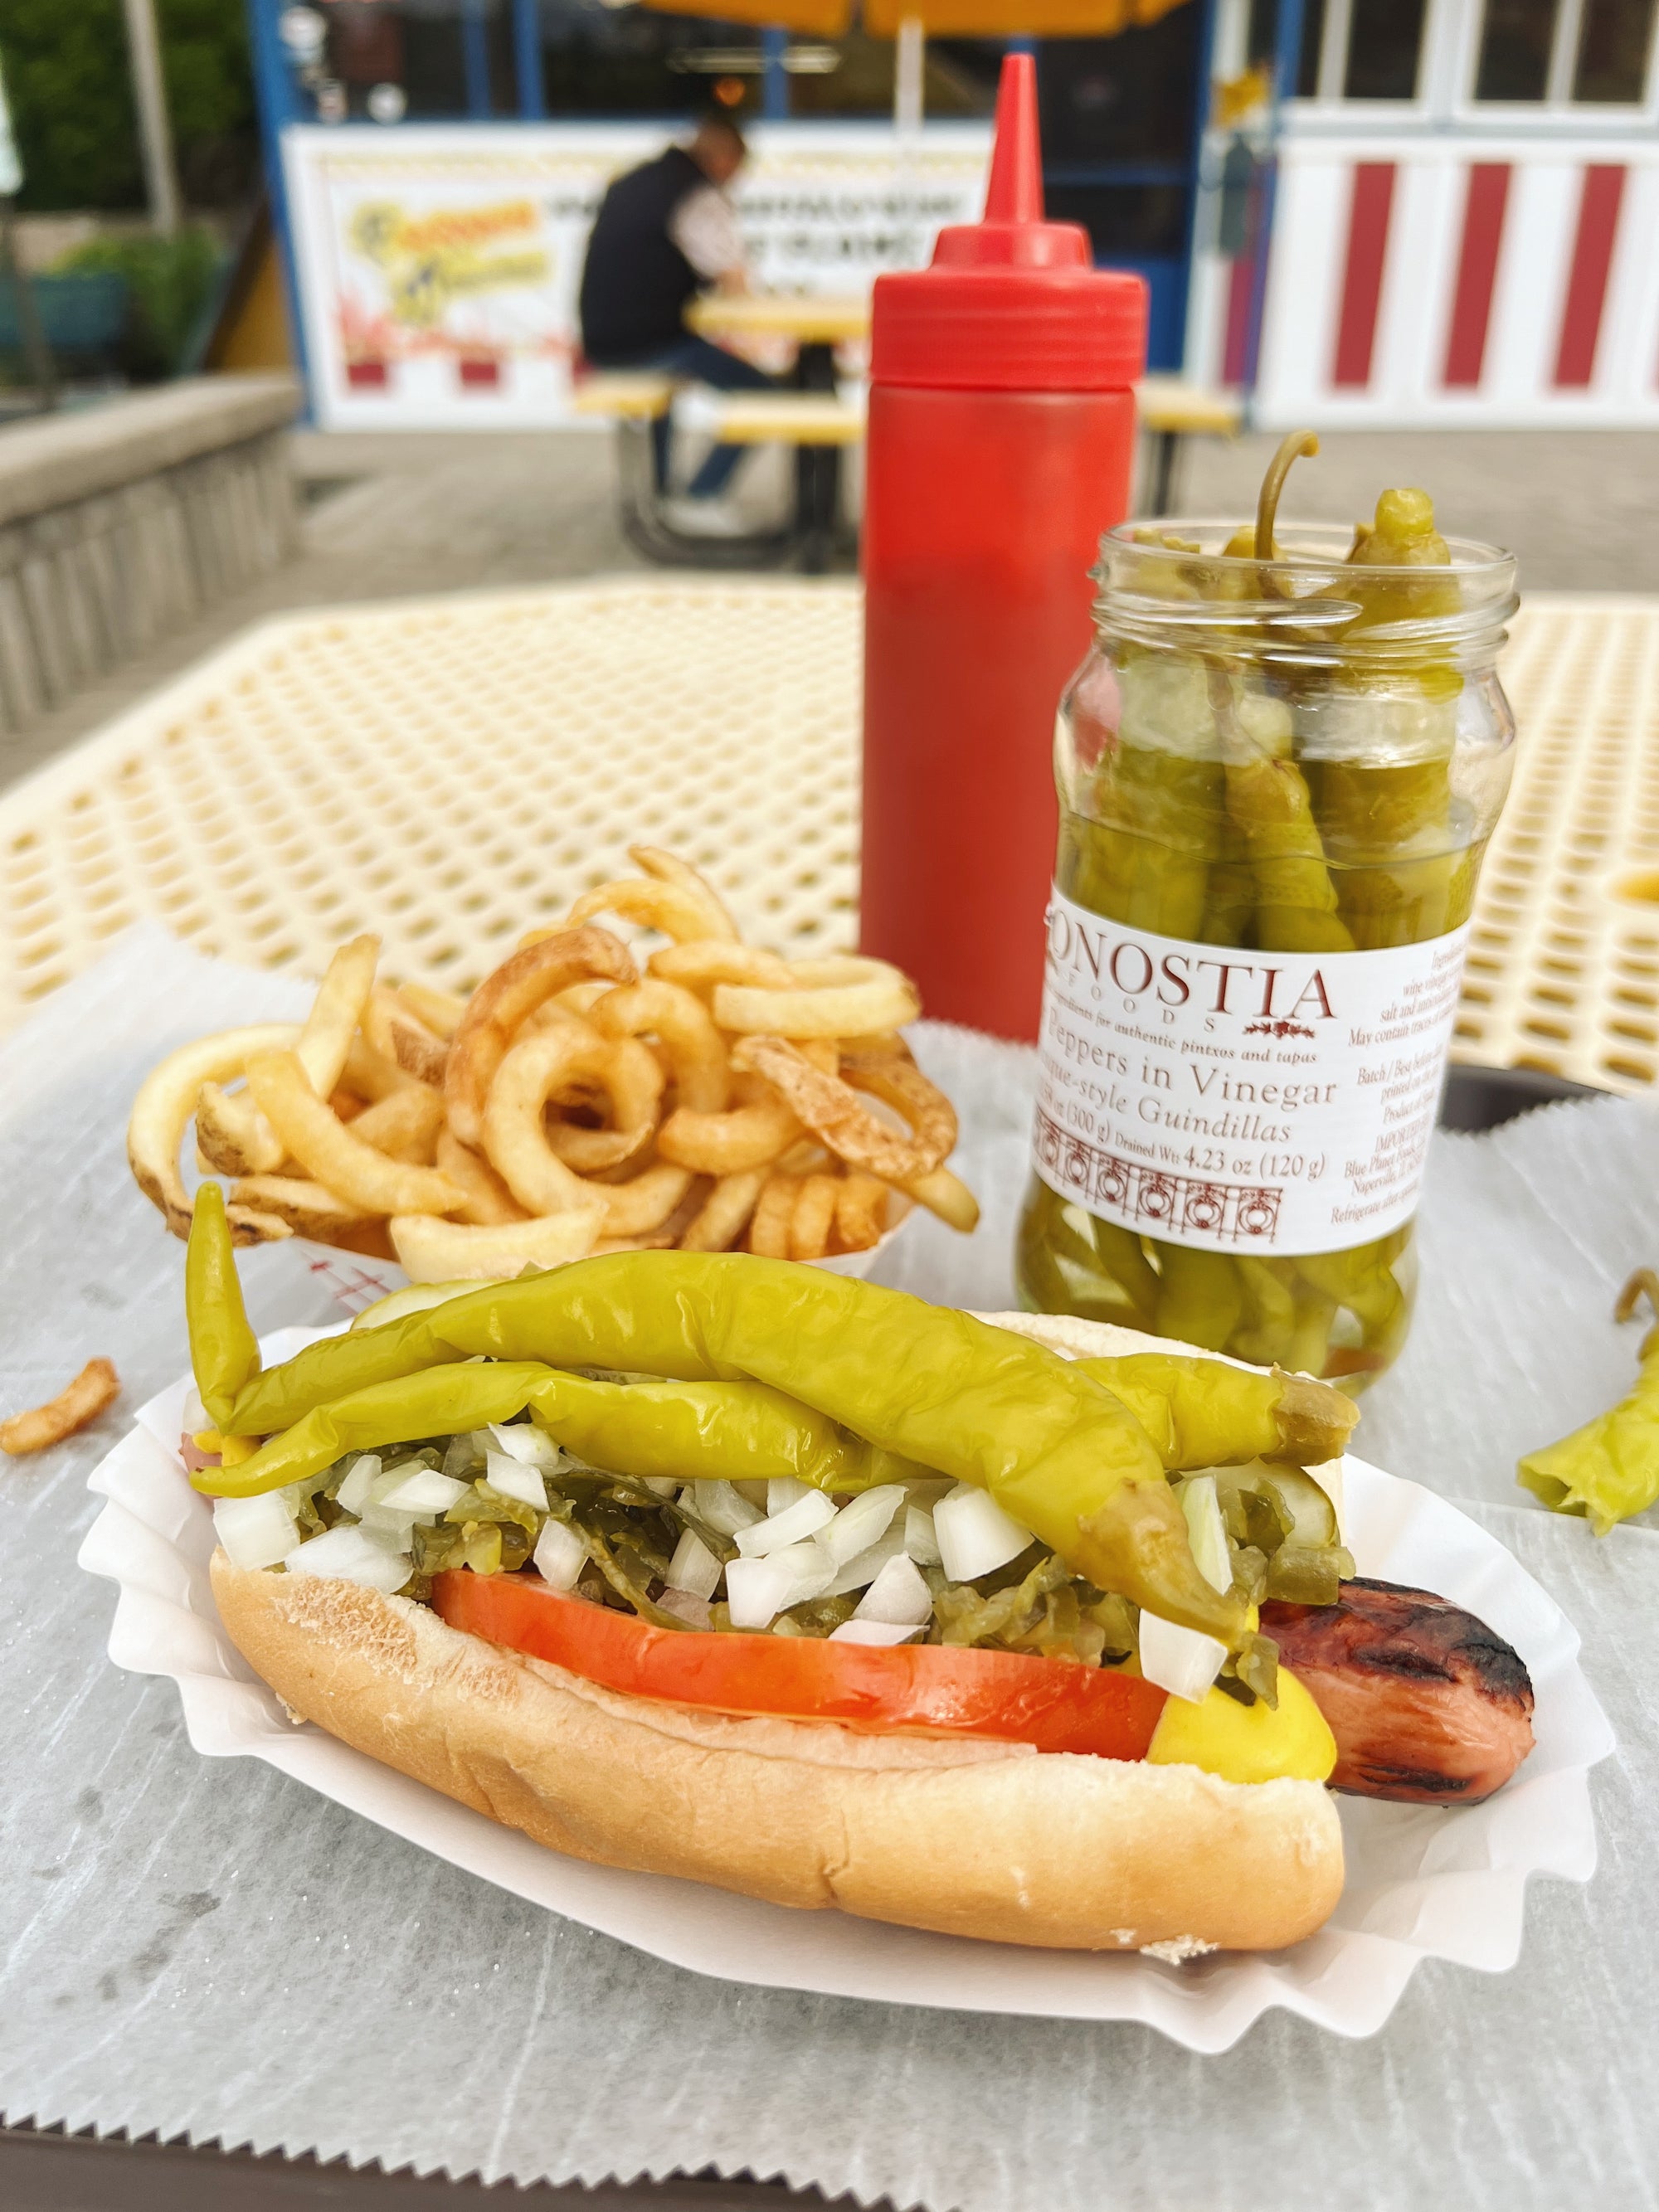 Guindilla peppers on a hot dog with curly fries - Donostia Foods